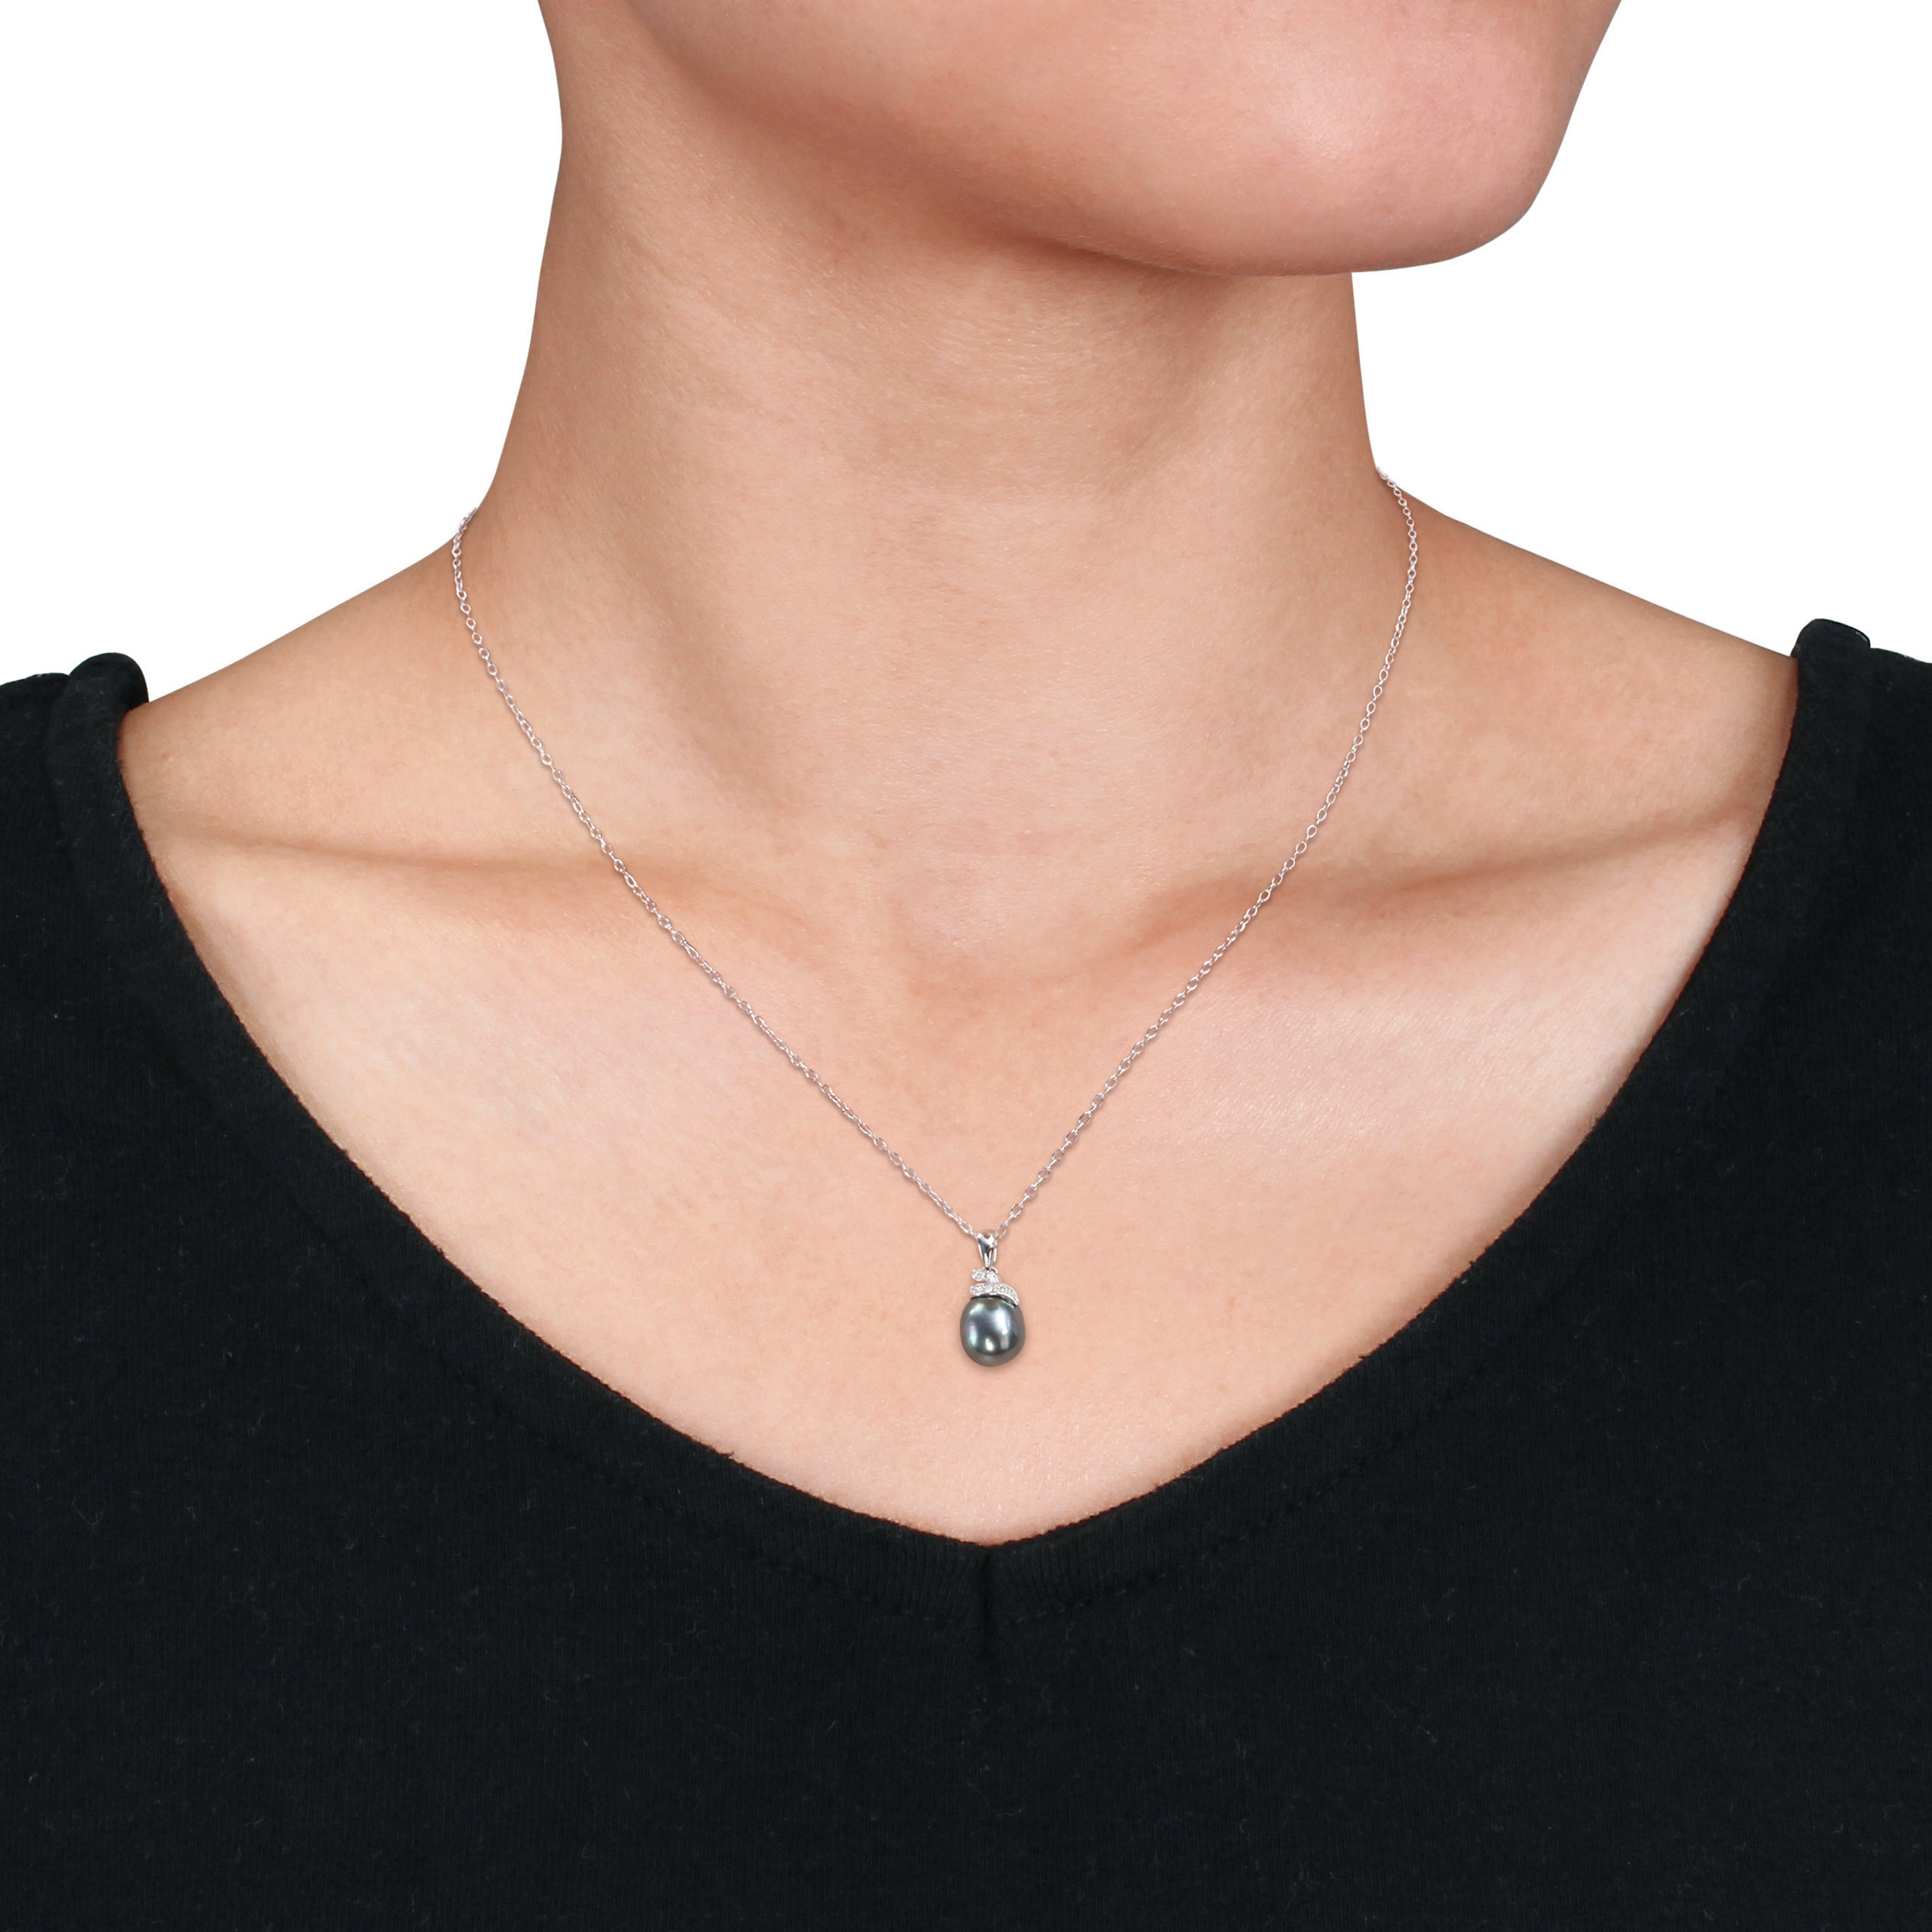 8-9 MM Black Tahitian Cultured Pearl and Diamond Accent Wrap Pendant with Chain in Sterling Silver - 18 in.